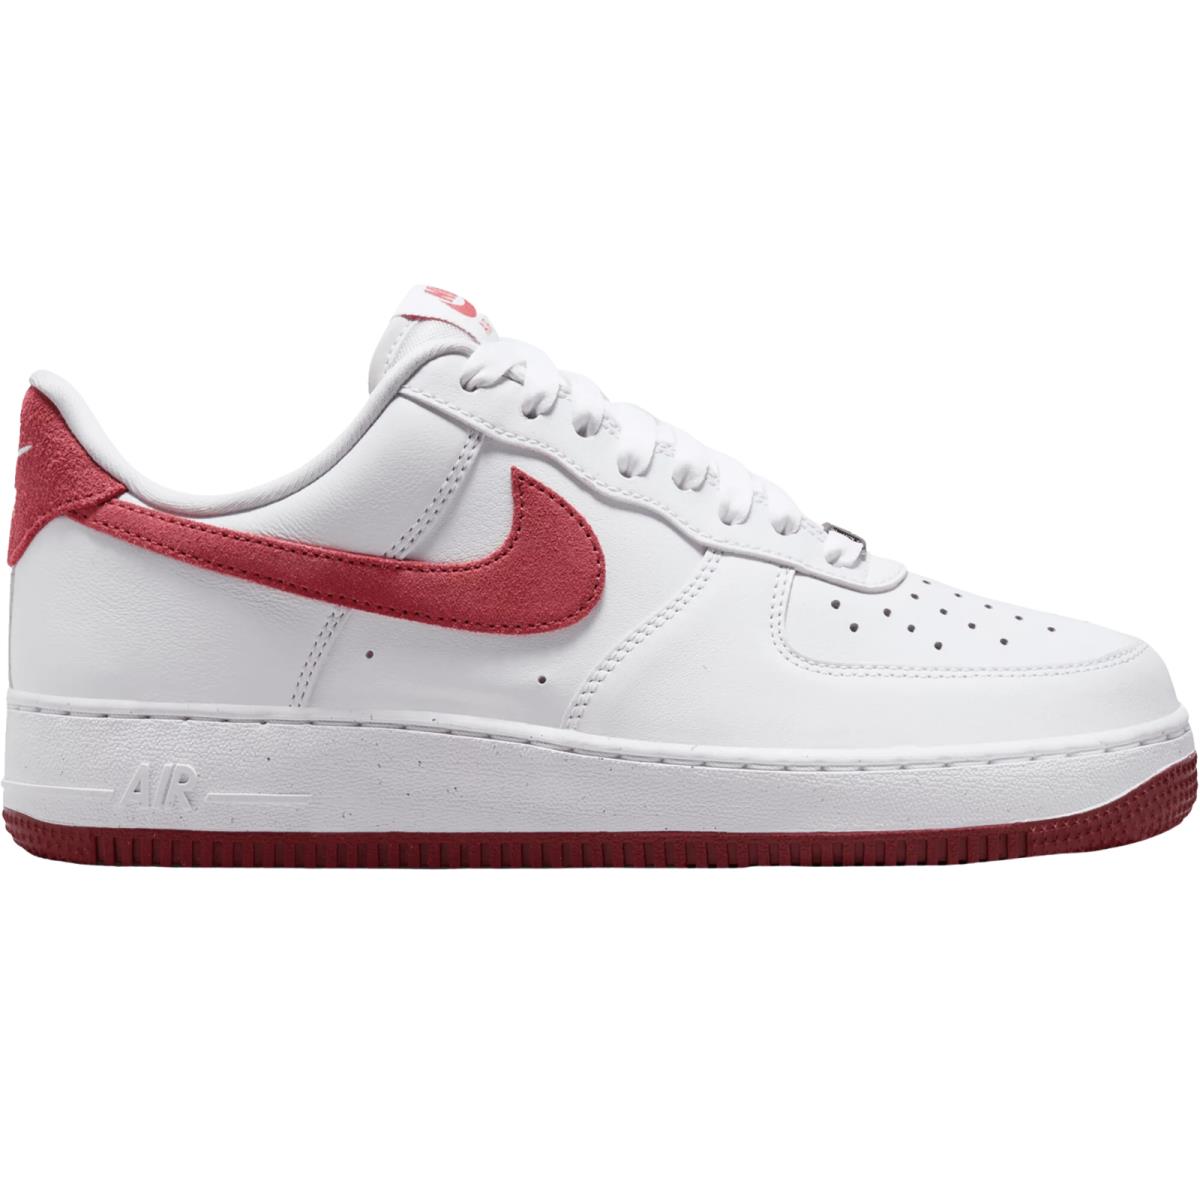 Nike Air Force 1 Women`s Casual Shoes All Colors US Sizes 6-11 White/Team Red/Dragon Red/Adobe